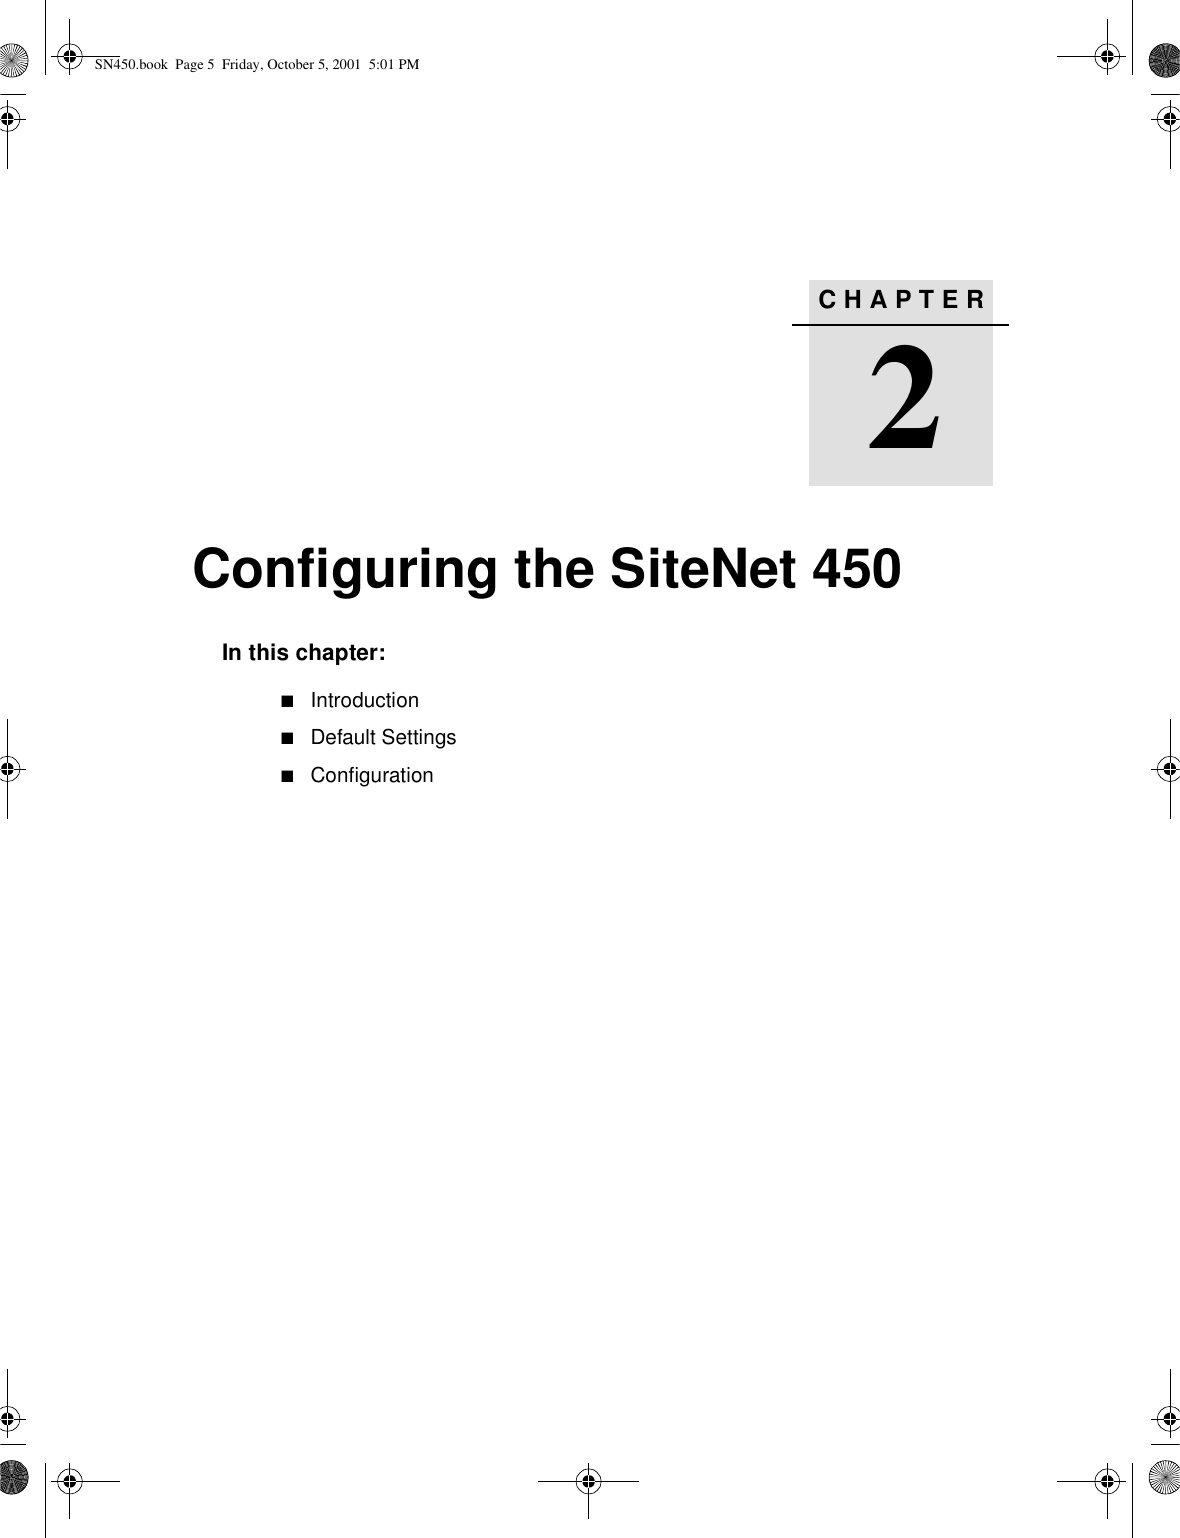 CHAPTER2Configuring the SiteNet 4502In this chapter:■Introduction■Default Settings■ConfigurationSN450.book  Page 5  Friday, October 5, 2001  5:01 PM